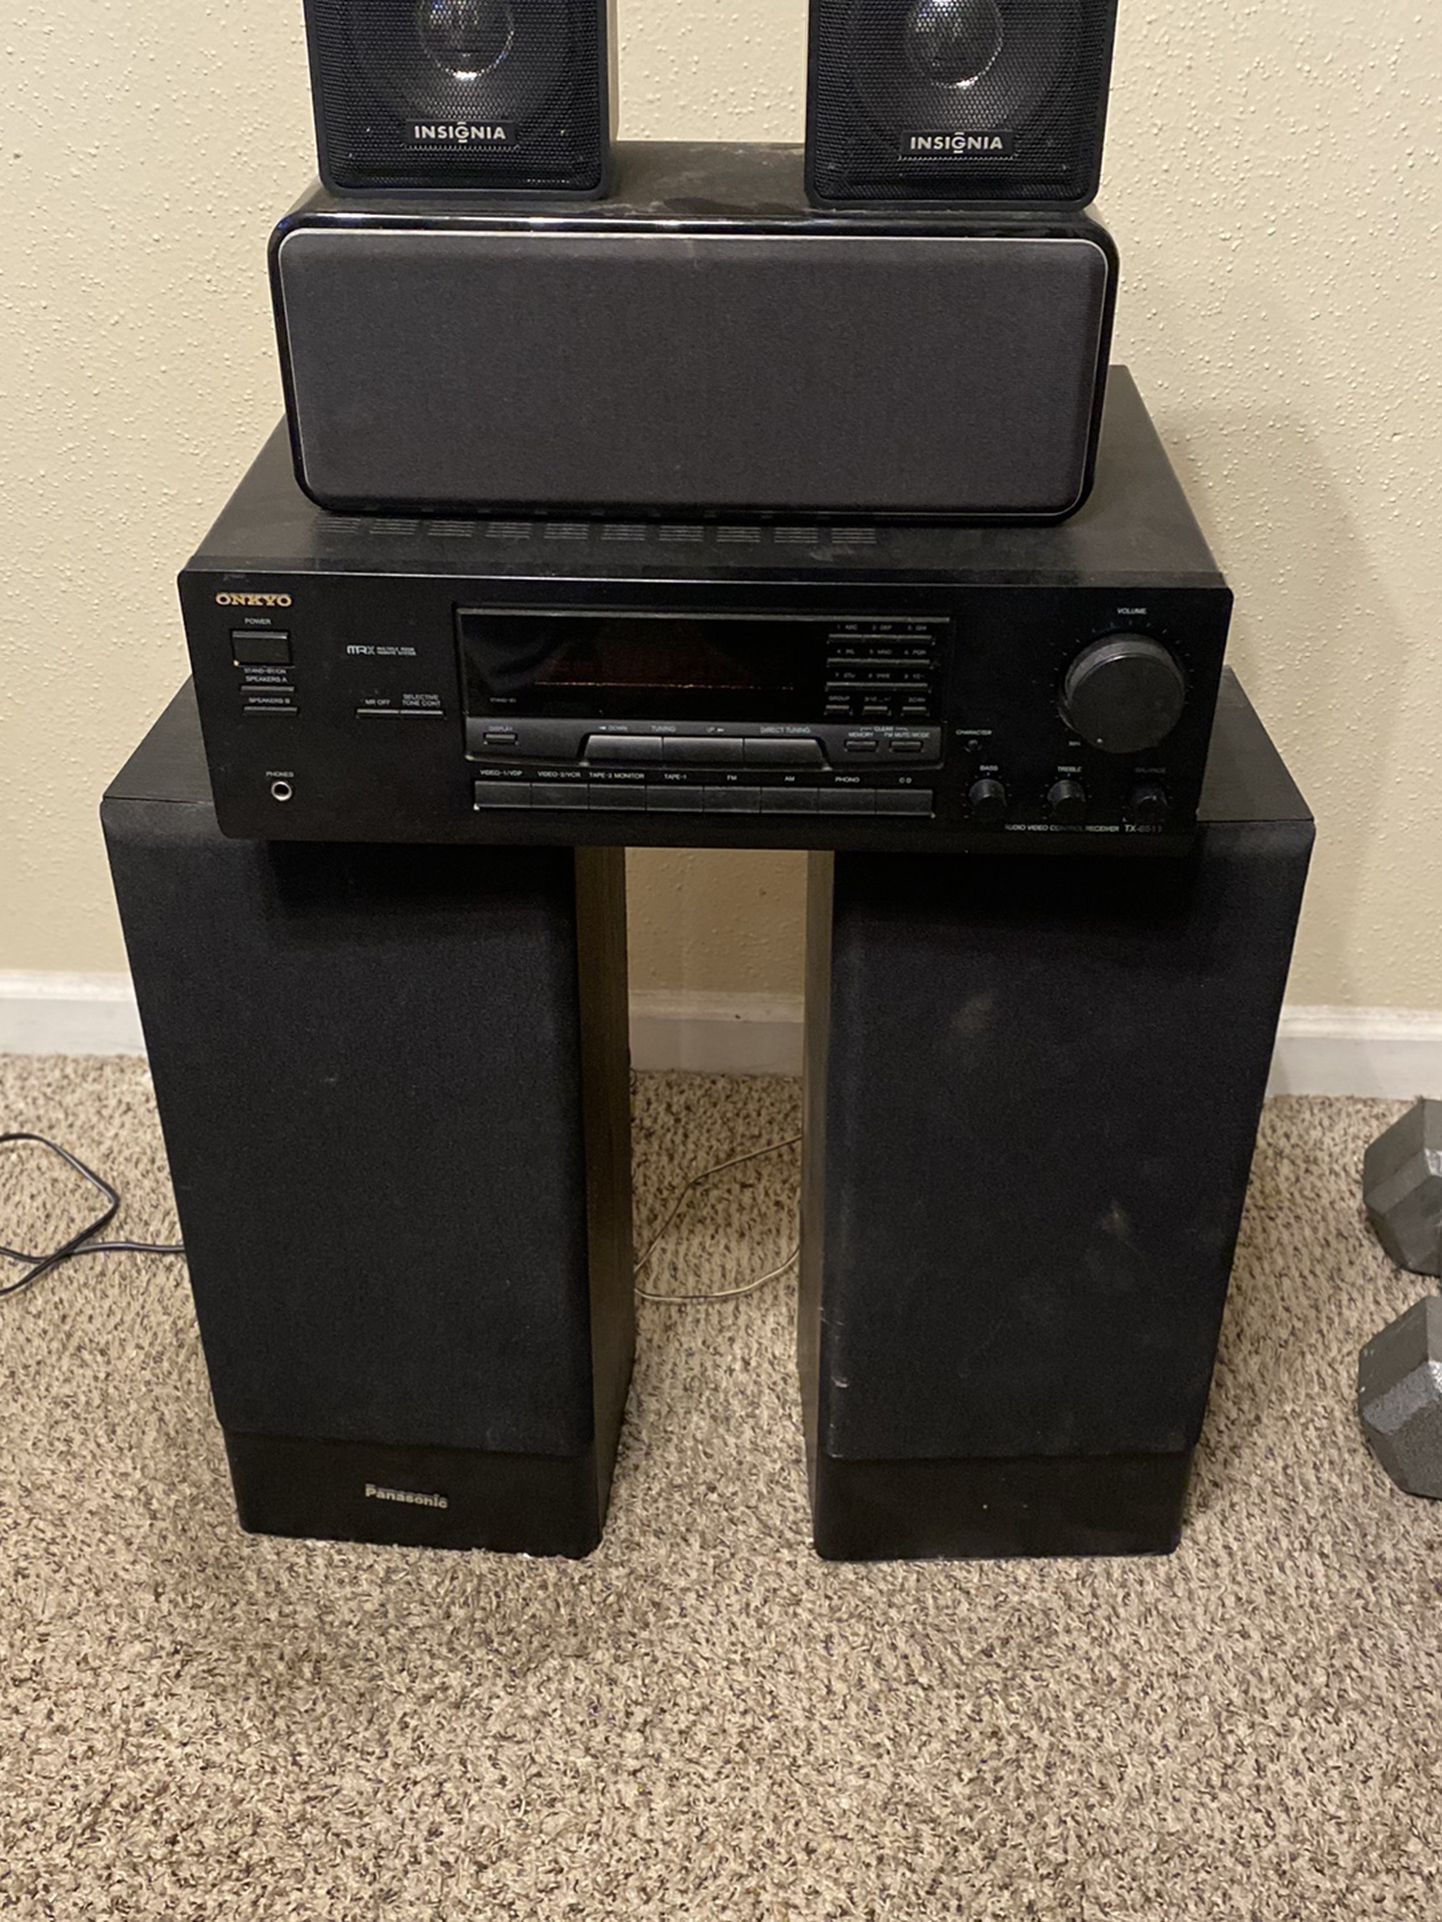 Stereo With 5 Speakers